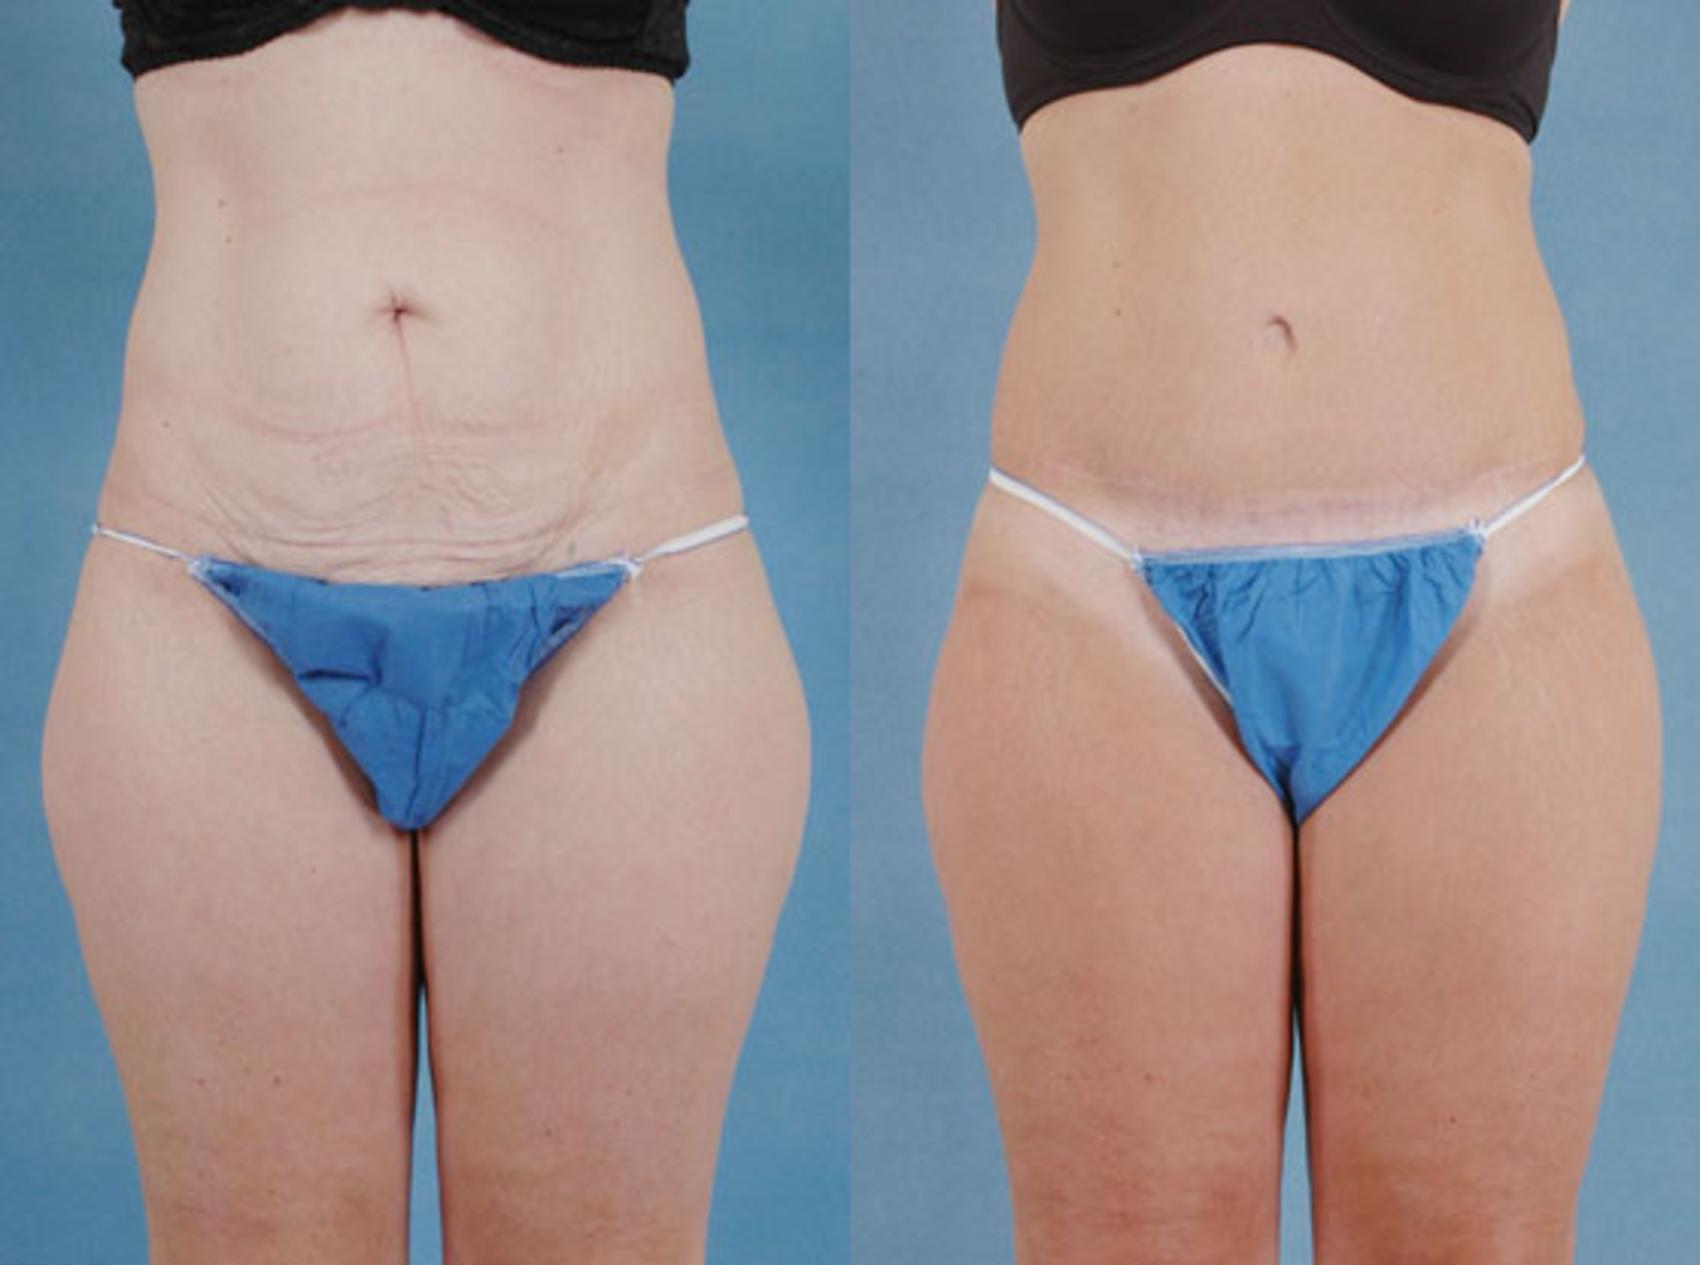 Tummy Tuck (Abdominoplasty) Before and After Photo Gallery | Tallahassee,  FL | Southeastern Plastic Surgery, .